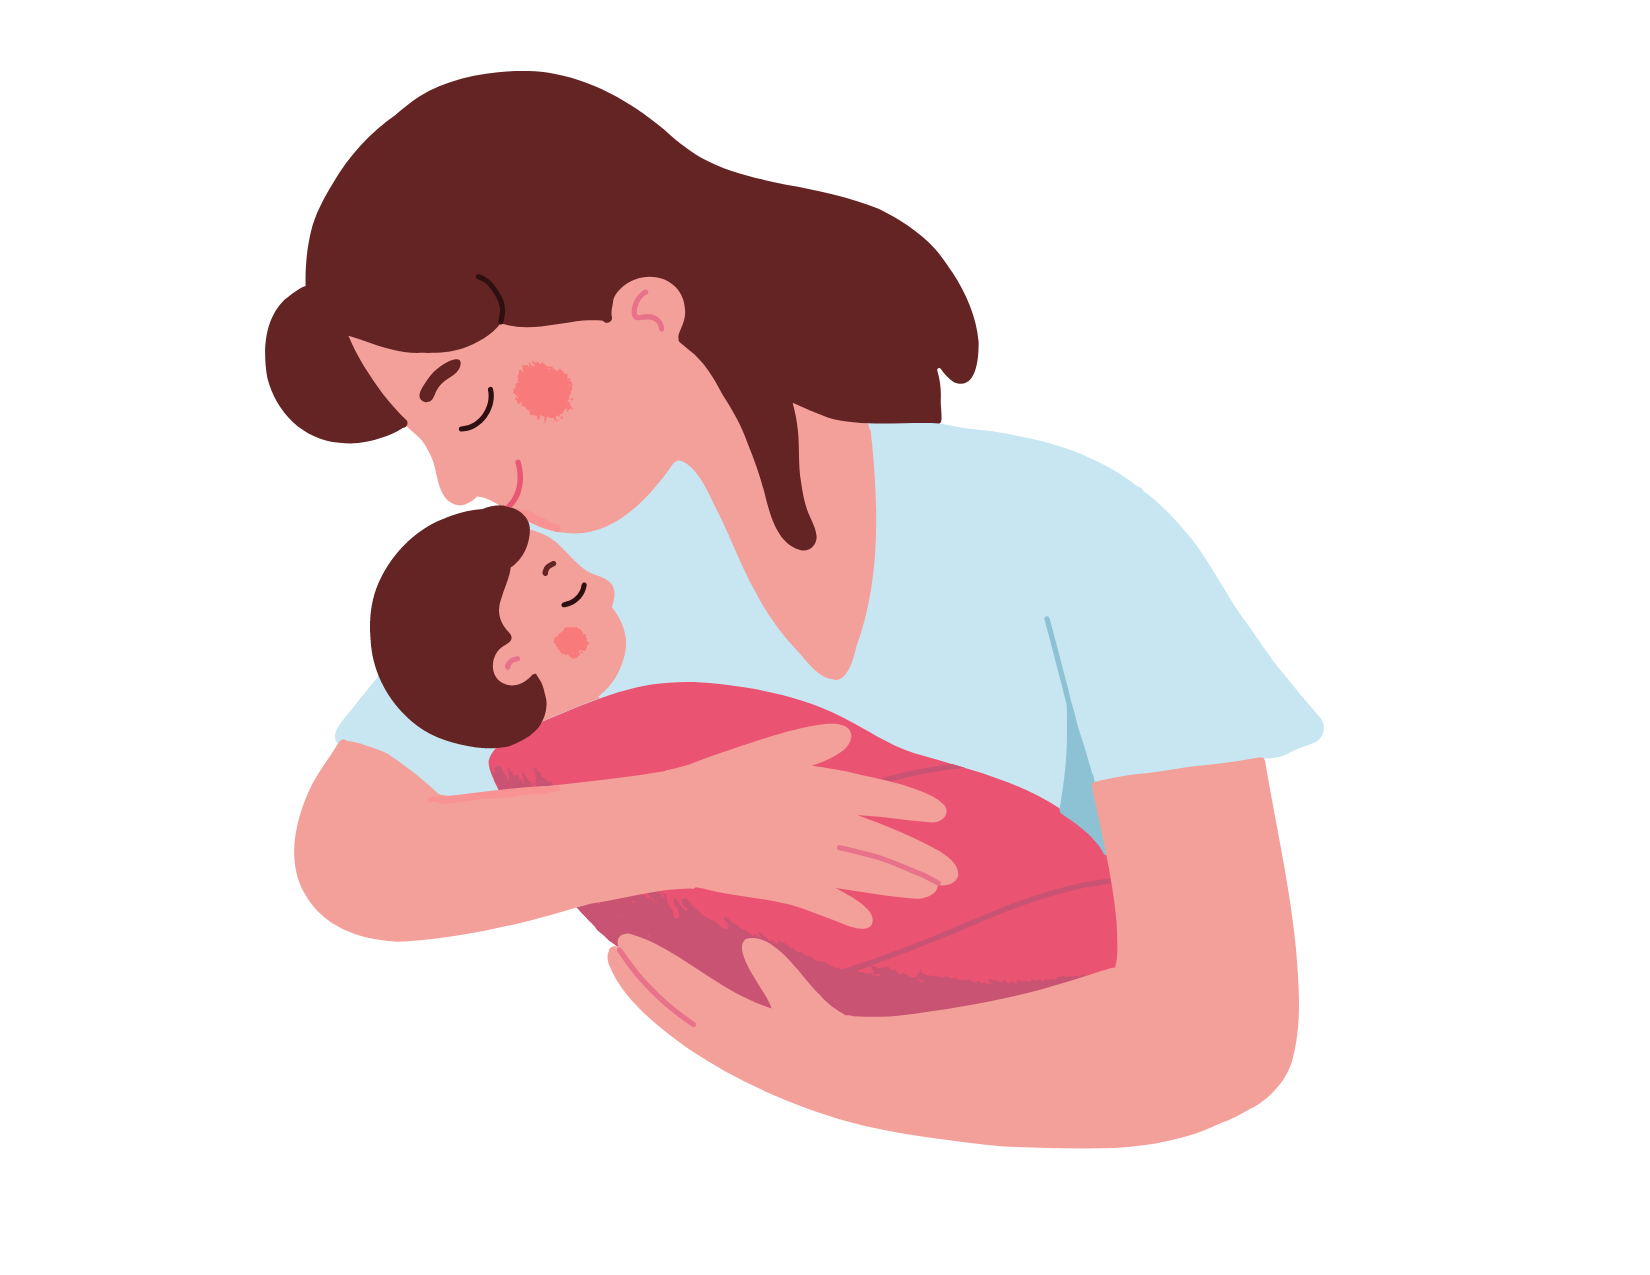 illustrated image of a person cradling a newborn baby while kissing its forehead